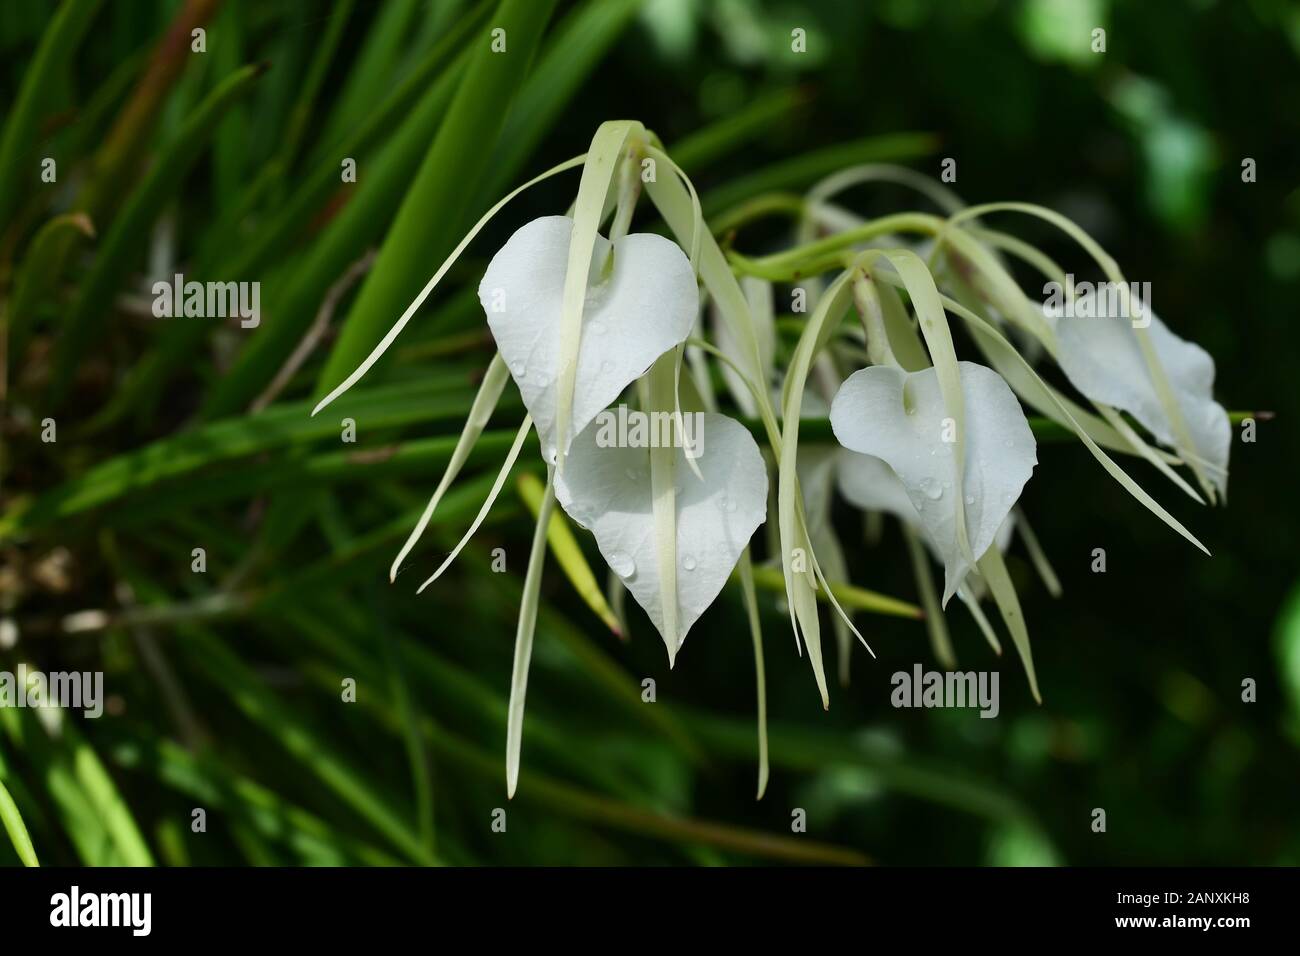 Water drops on Lady of the night orchid (Brassavola Nodosa) blossom with dark green bush in background, Freshness of plants after rain fall Stock Photo